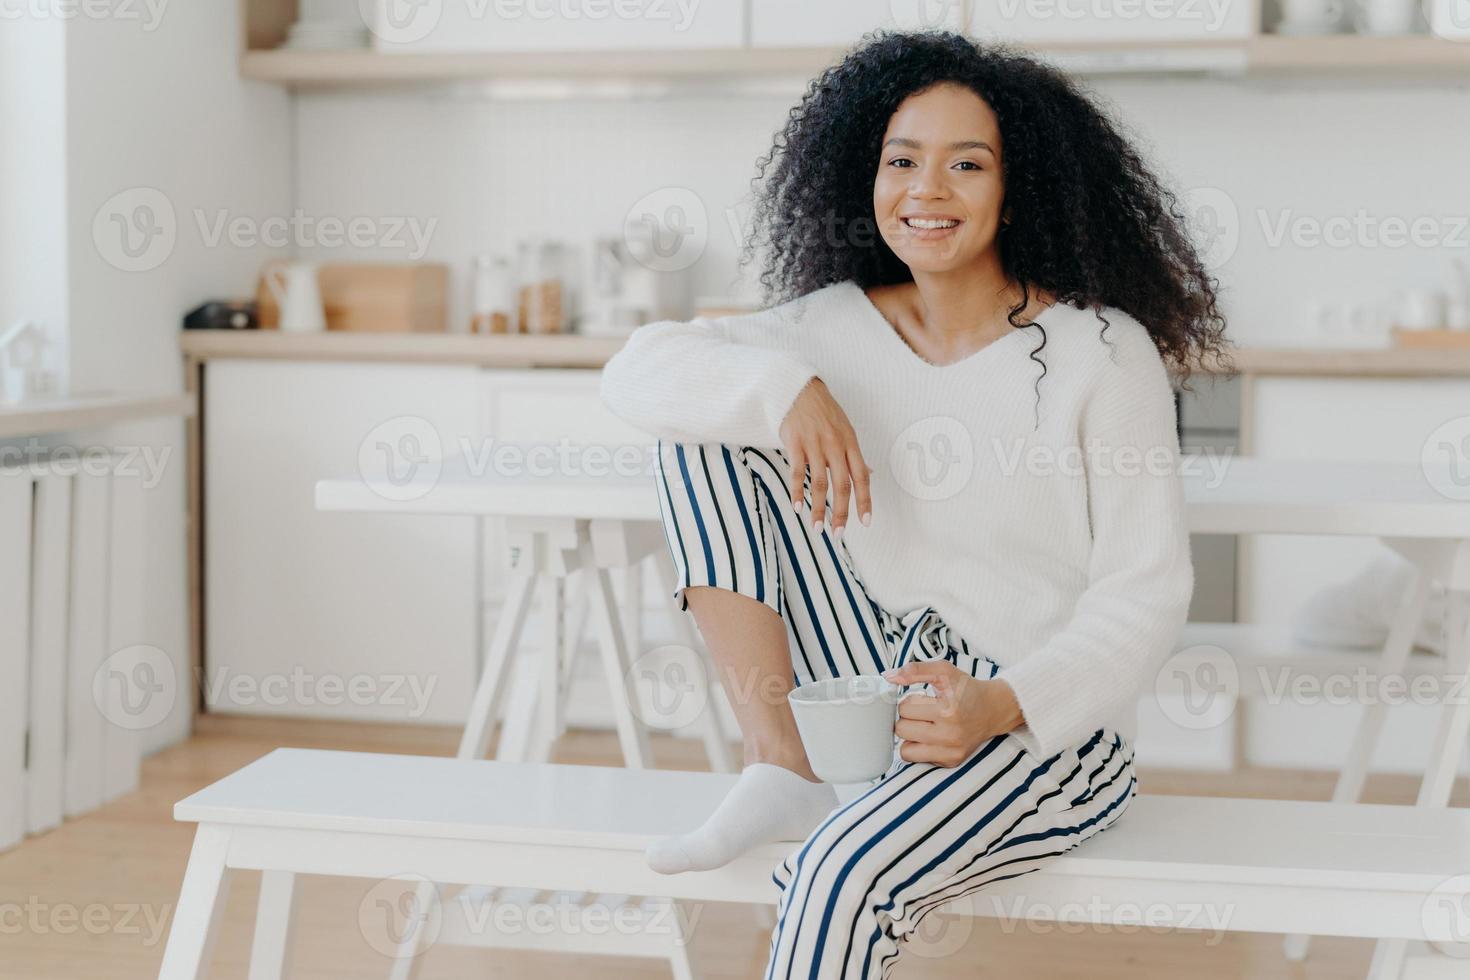 Glad African American woman holds cup of beverage, leans at knee, stylish jumper and striped trousers, smiles pleasantly, spends leisure time at home, sits at bench in kitchen 8836419